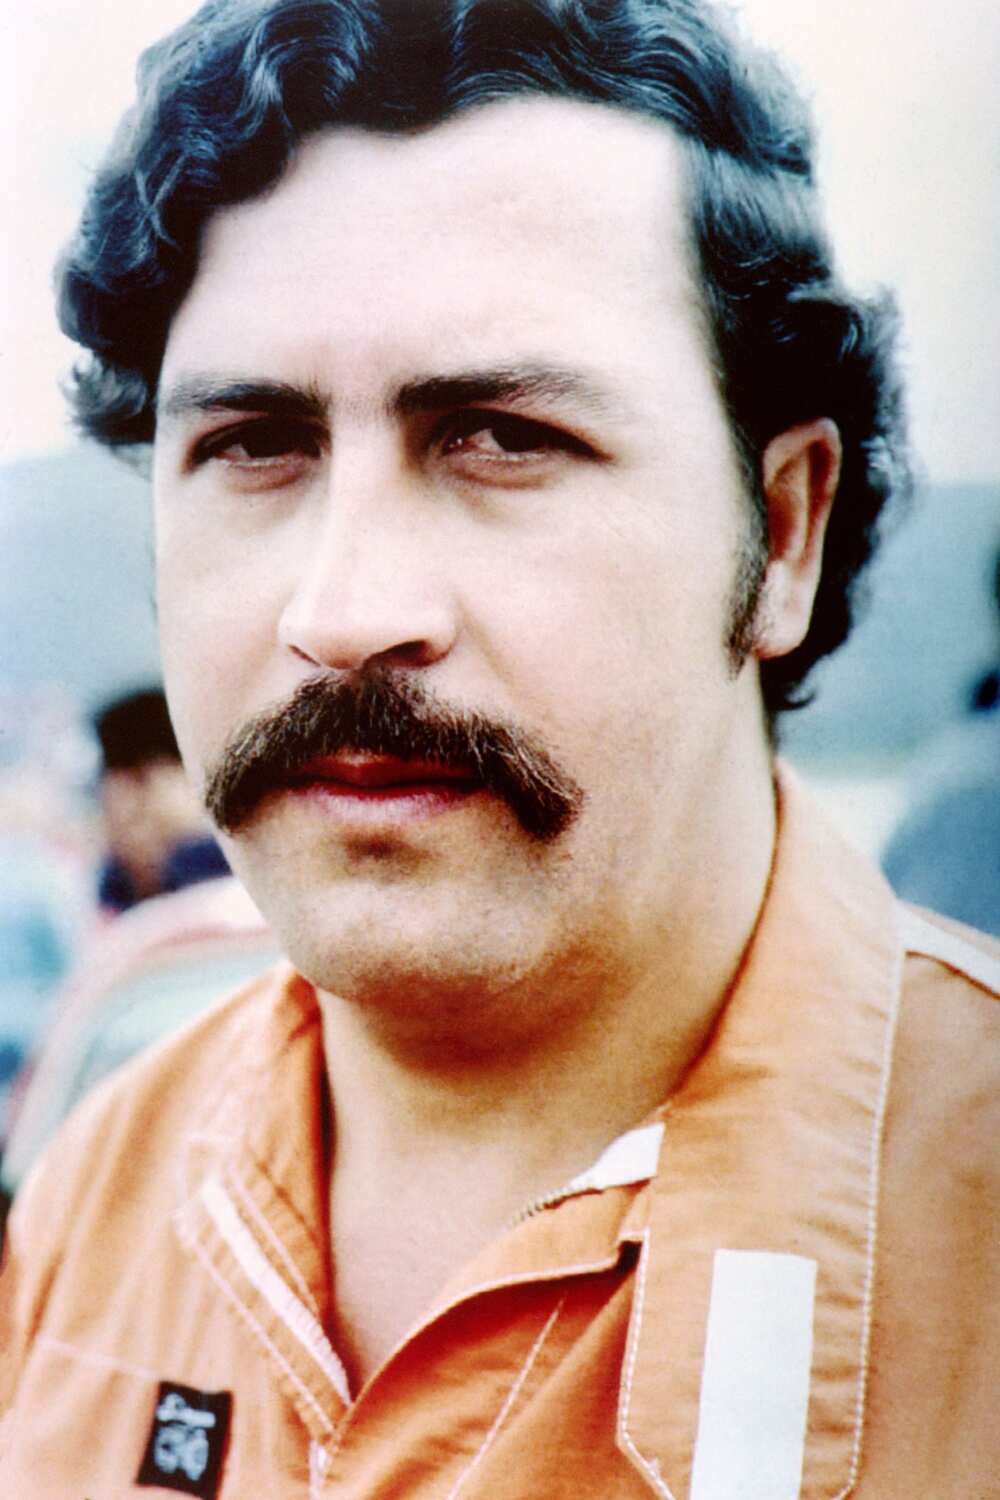 how much money did Pablo Escobar have